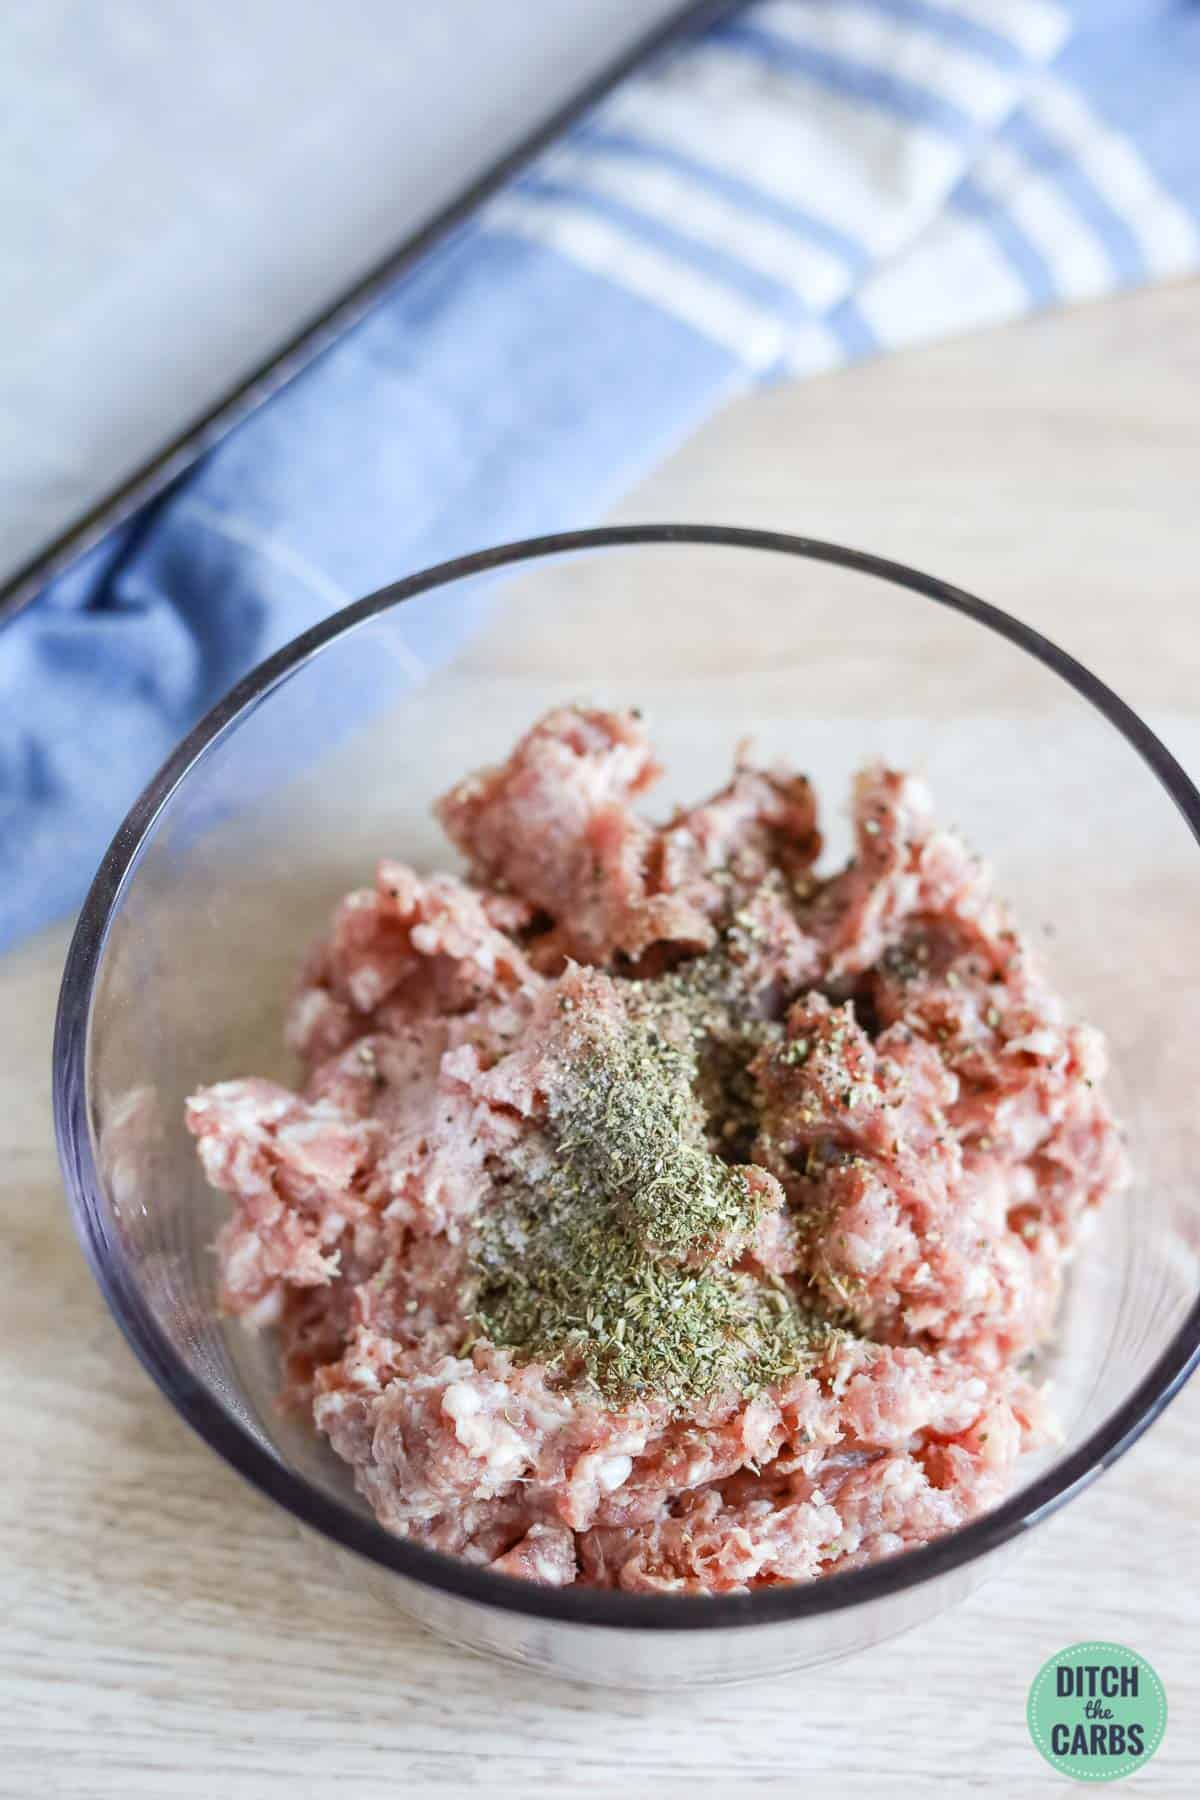 ground pork and herbs with seasoning to make a high-protein snack